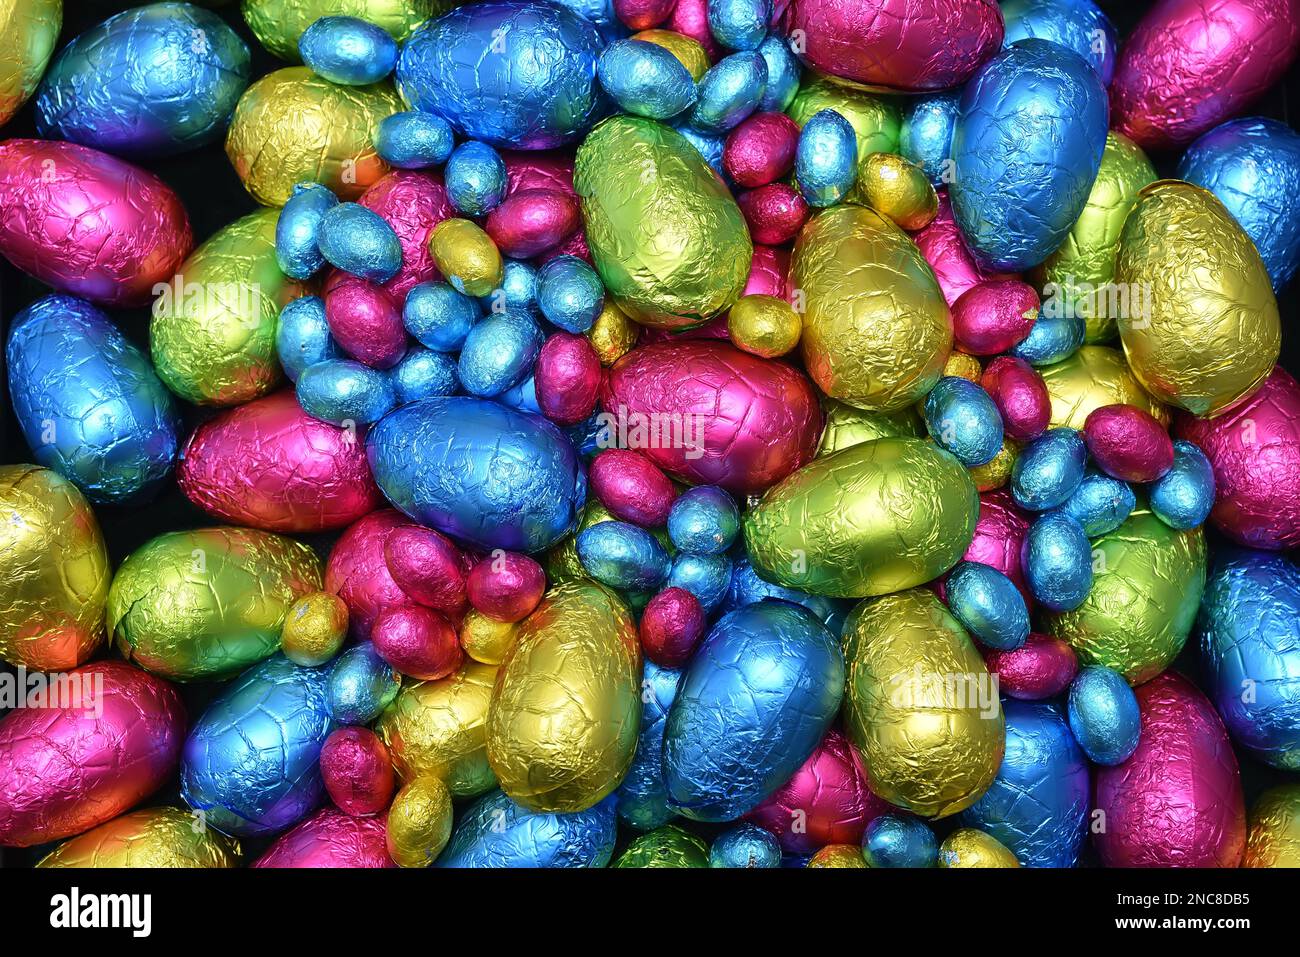 Pile or group of multi colored and different sizes of colourful foil wrapped chocolate easter eggs in pink, blue, yellow and lime green. Stock Photo